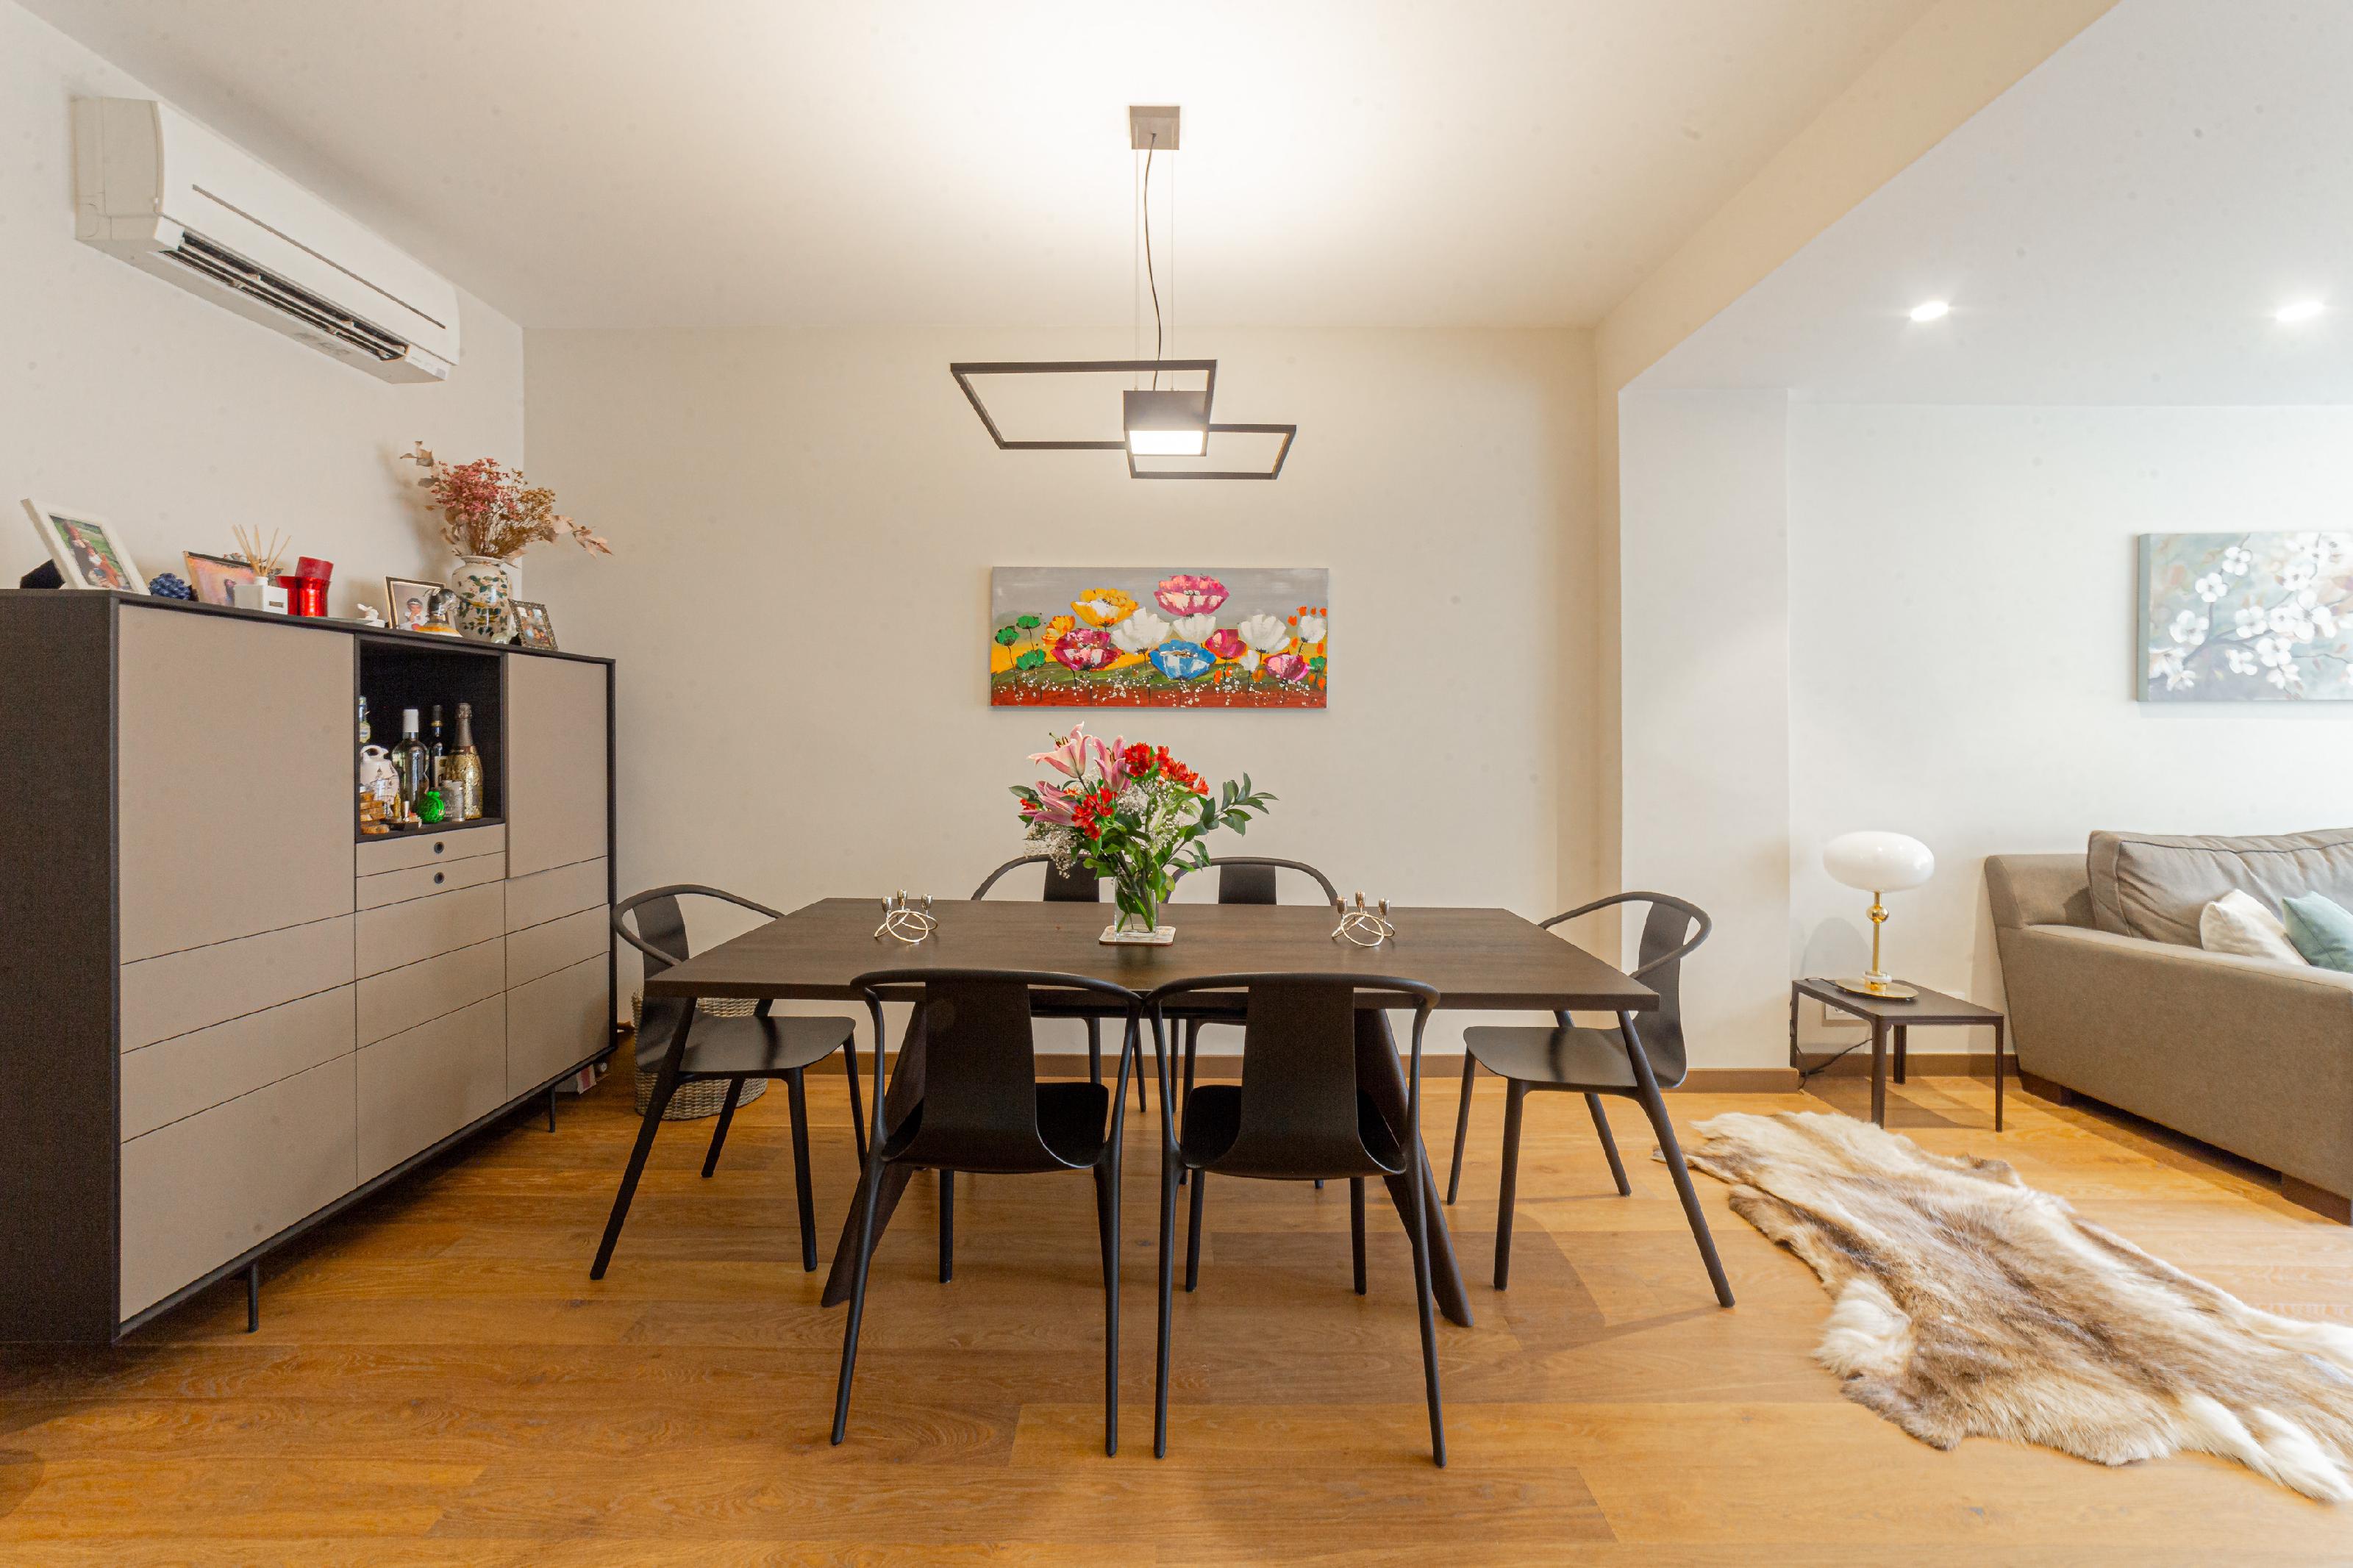 274248 Flat for sale in Eixample, Fort Pienc 22